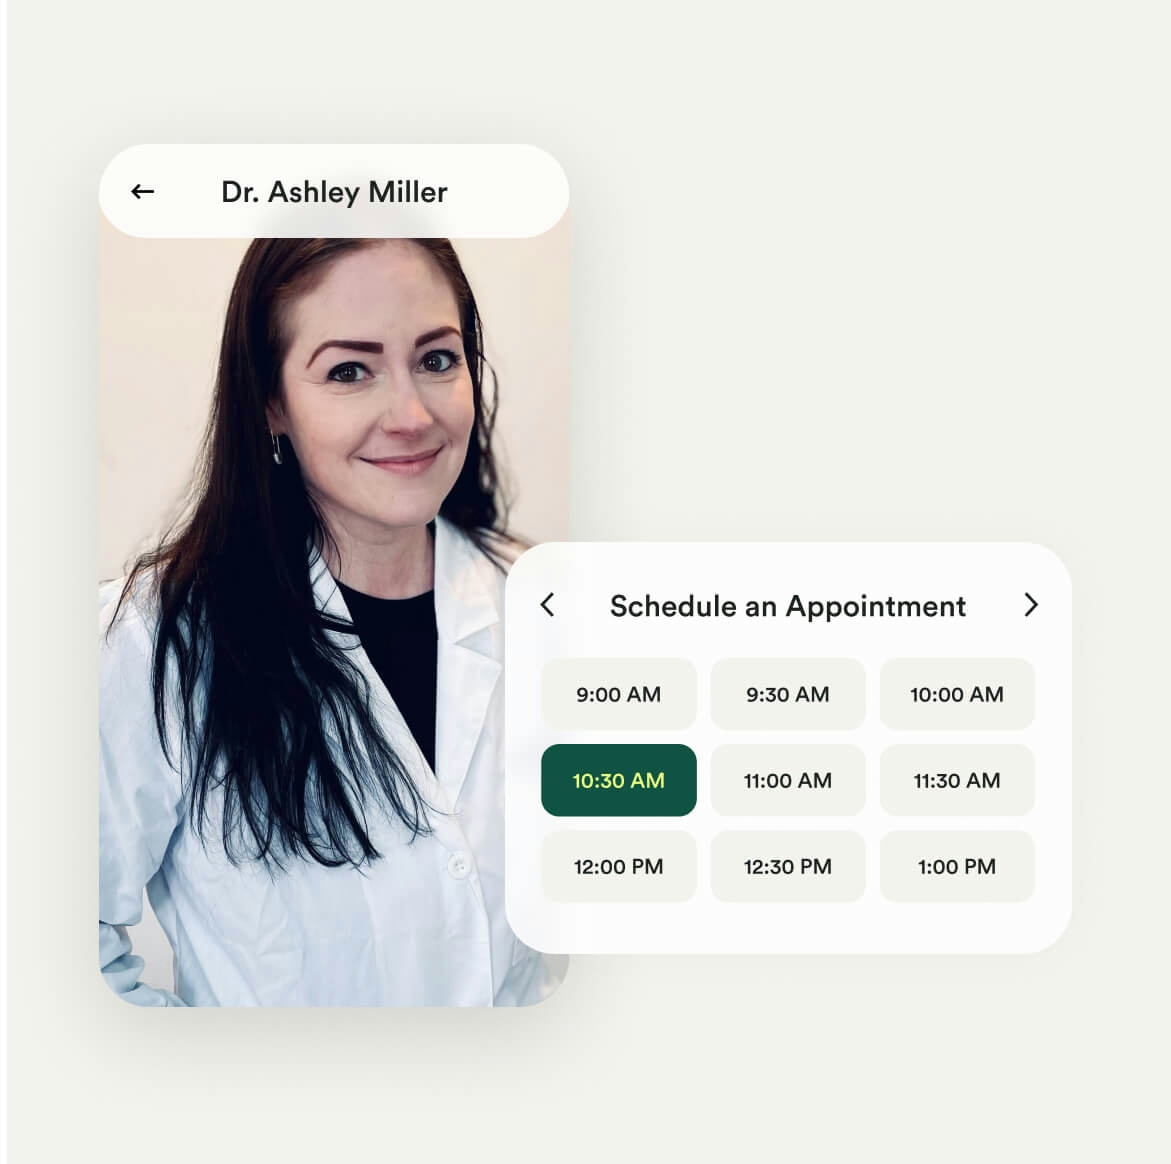 Application user interface showing telehealth visit and appointment scheduling features